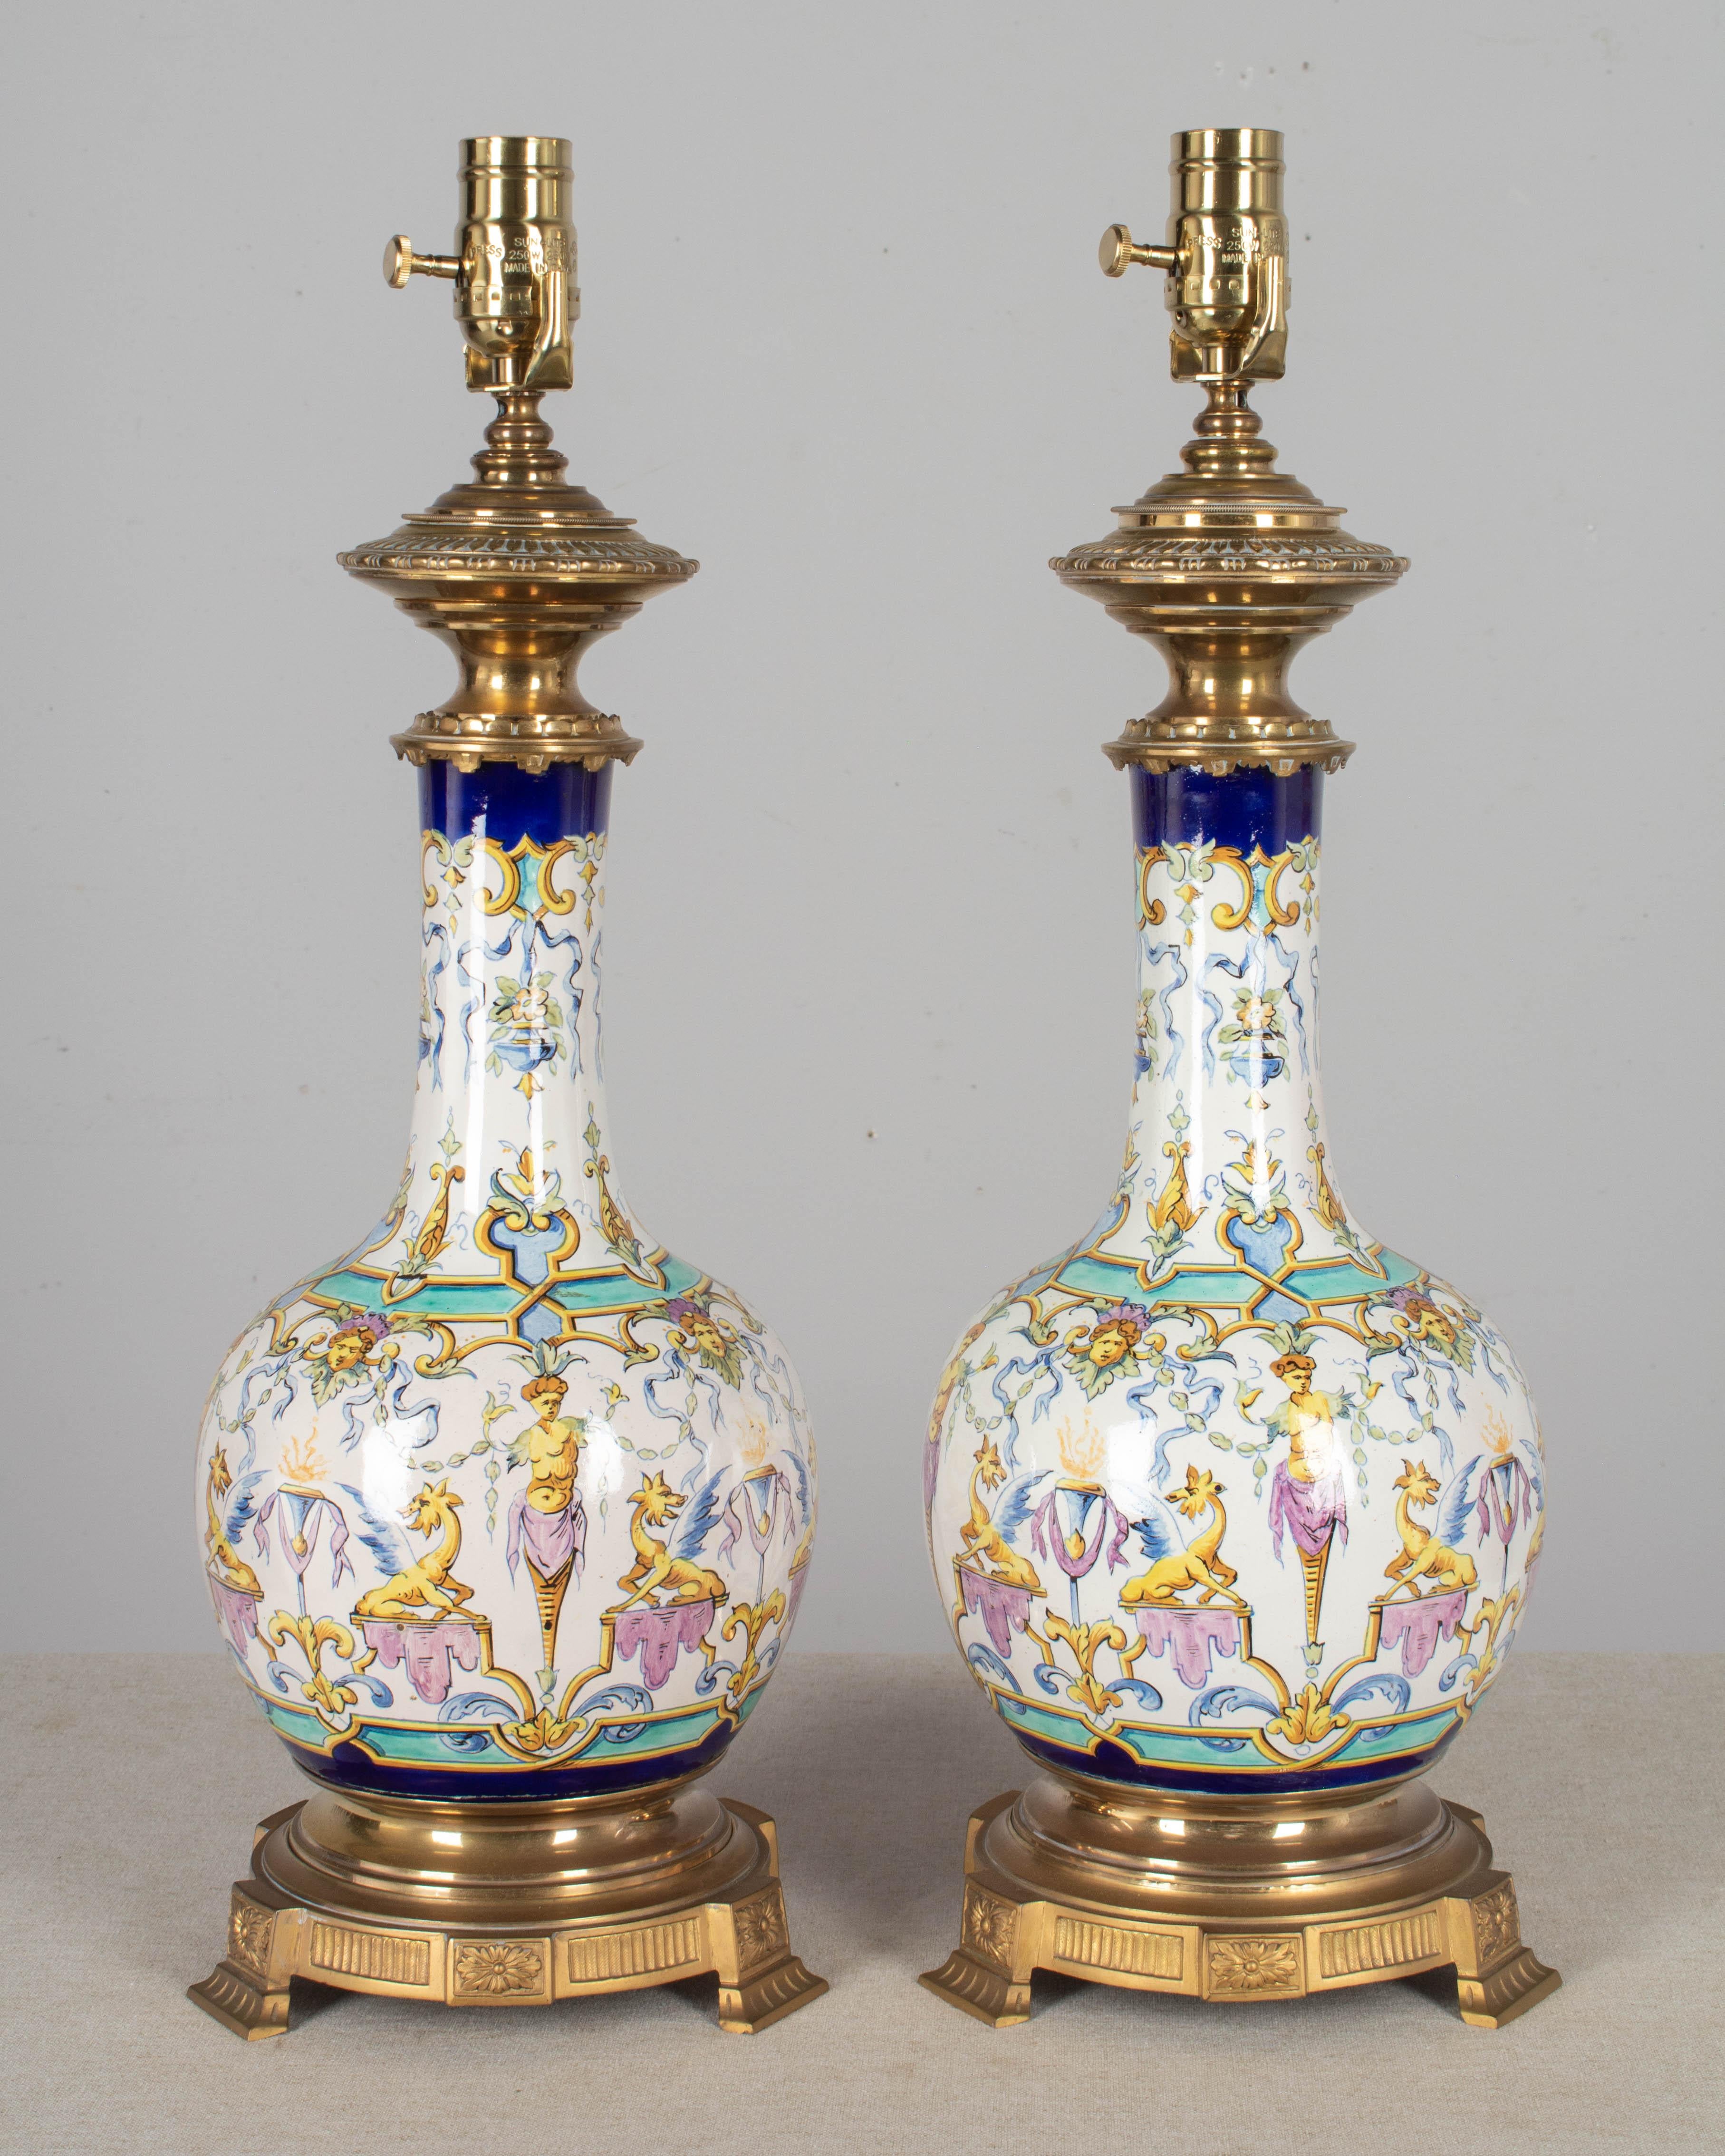 Bronze Pair of 19th Century French Gien Faience Lamps